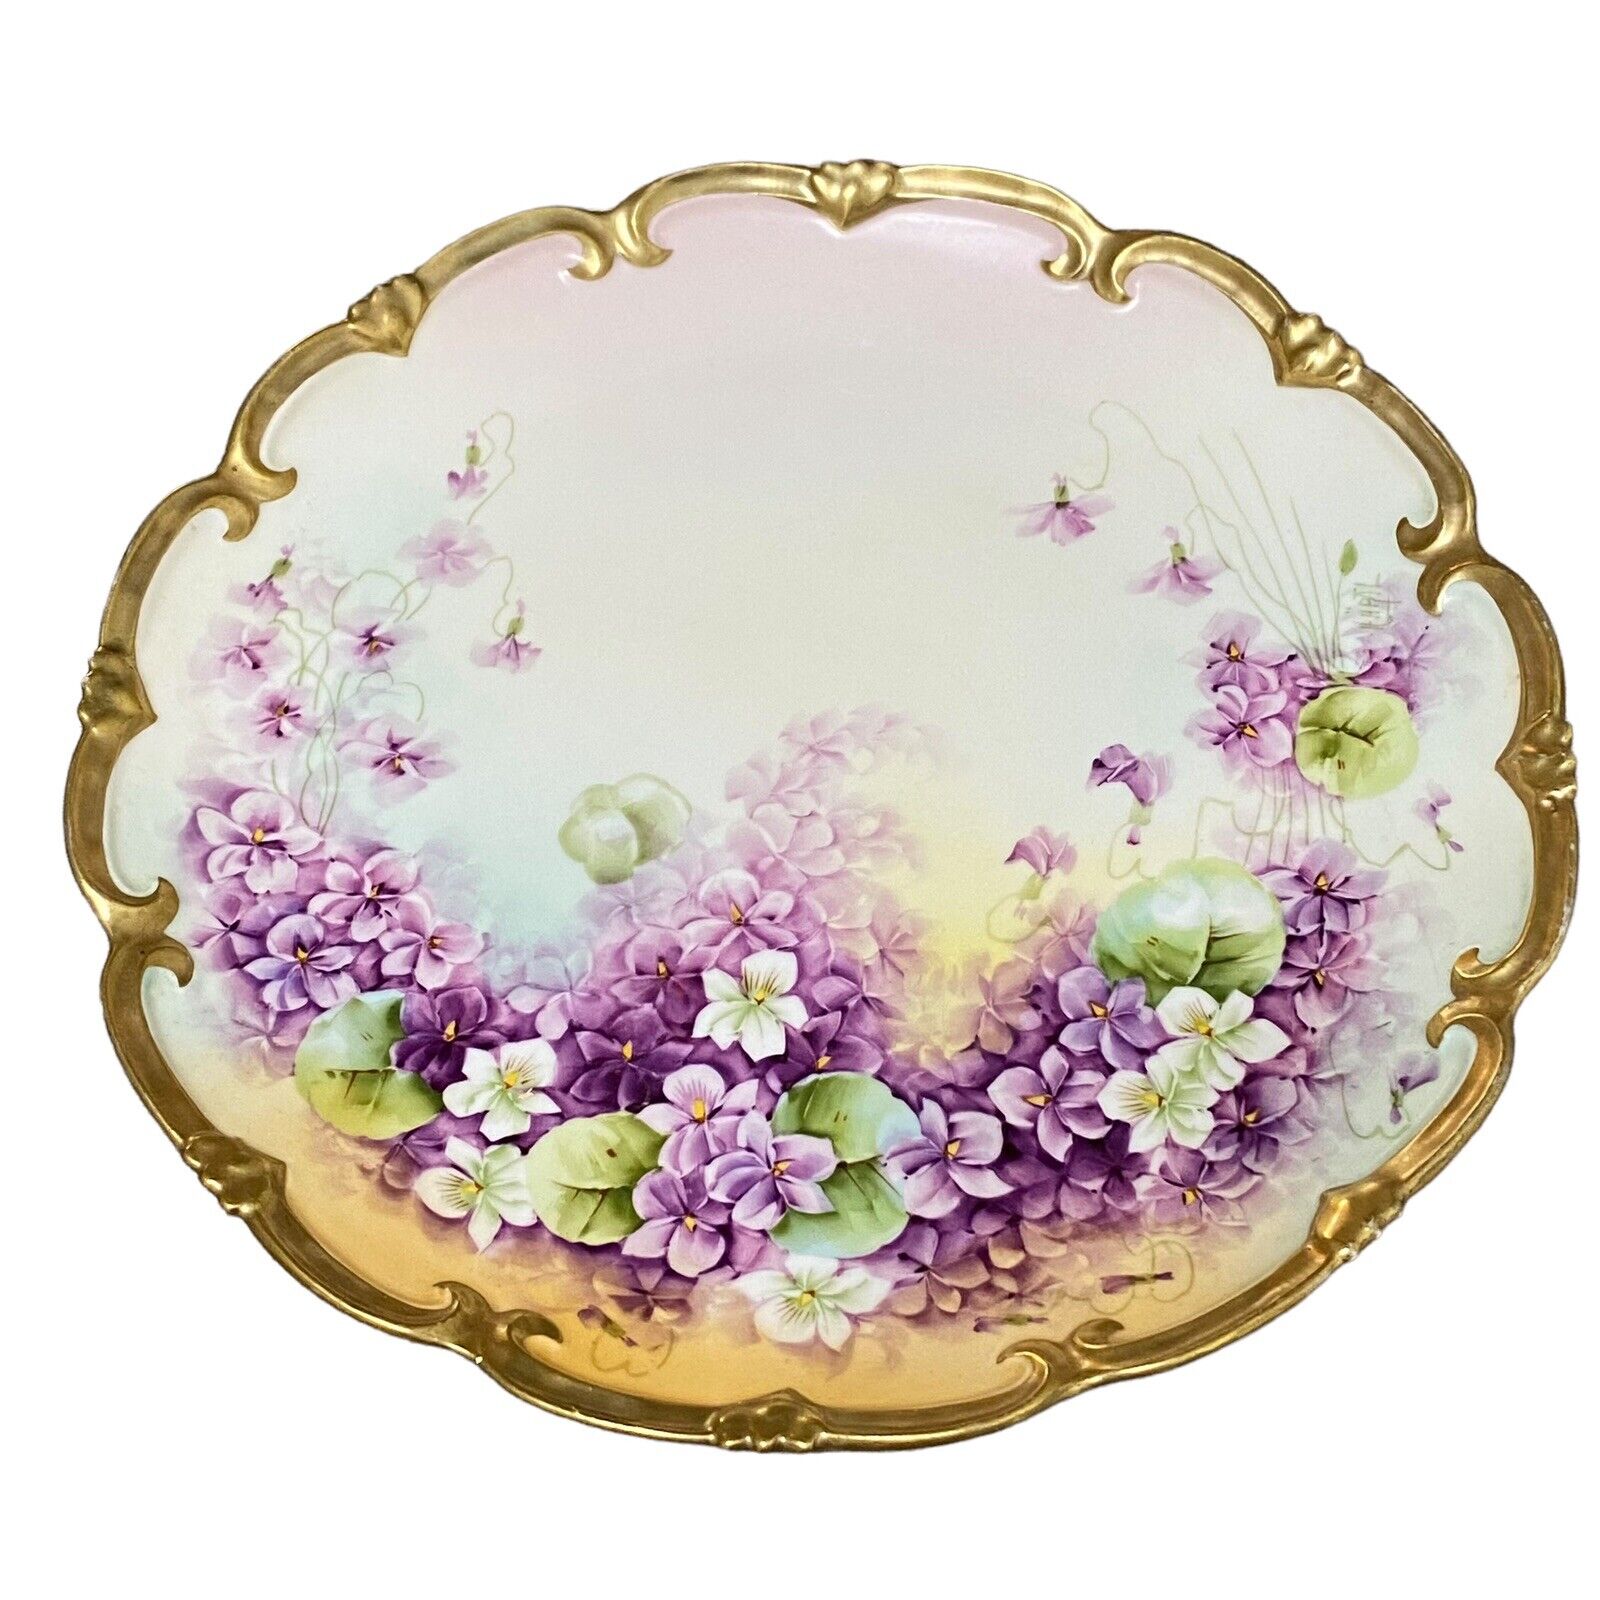 Antique Vienna Austria Hand Painted Porcelain Plate Signed Gold Scalloped Floral